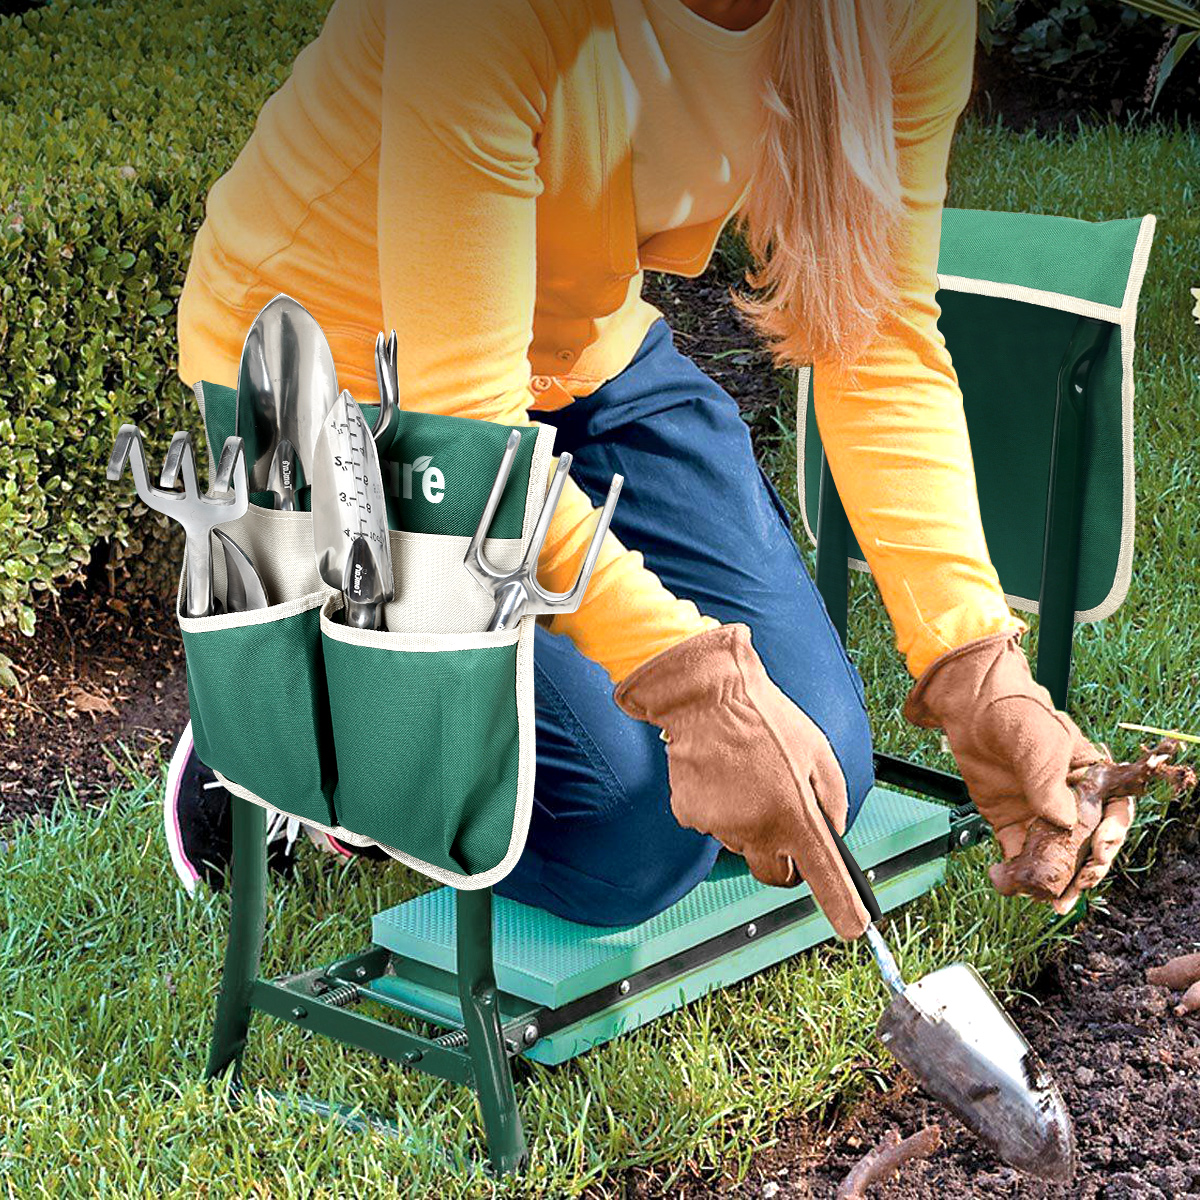 TomCare Upgraded Garden Kneeler Seat Widen Soft Kneeling Pad Garden Tools Stools Garden Bench with 2 Large Tool Pouches Outdoor Foldable Sturdy Gardening Tools for Gardeners, Green